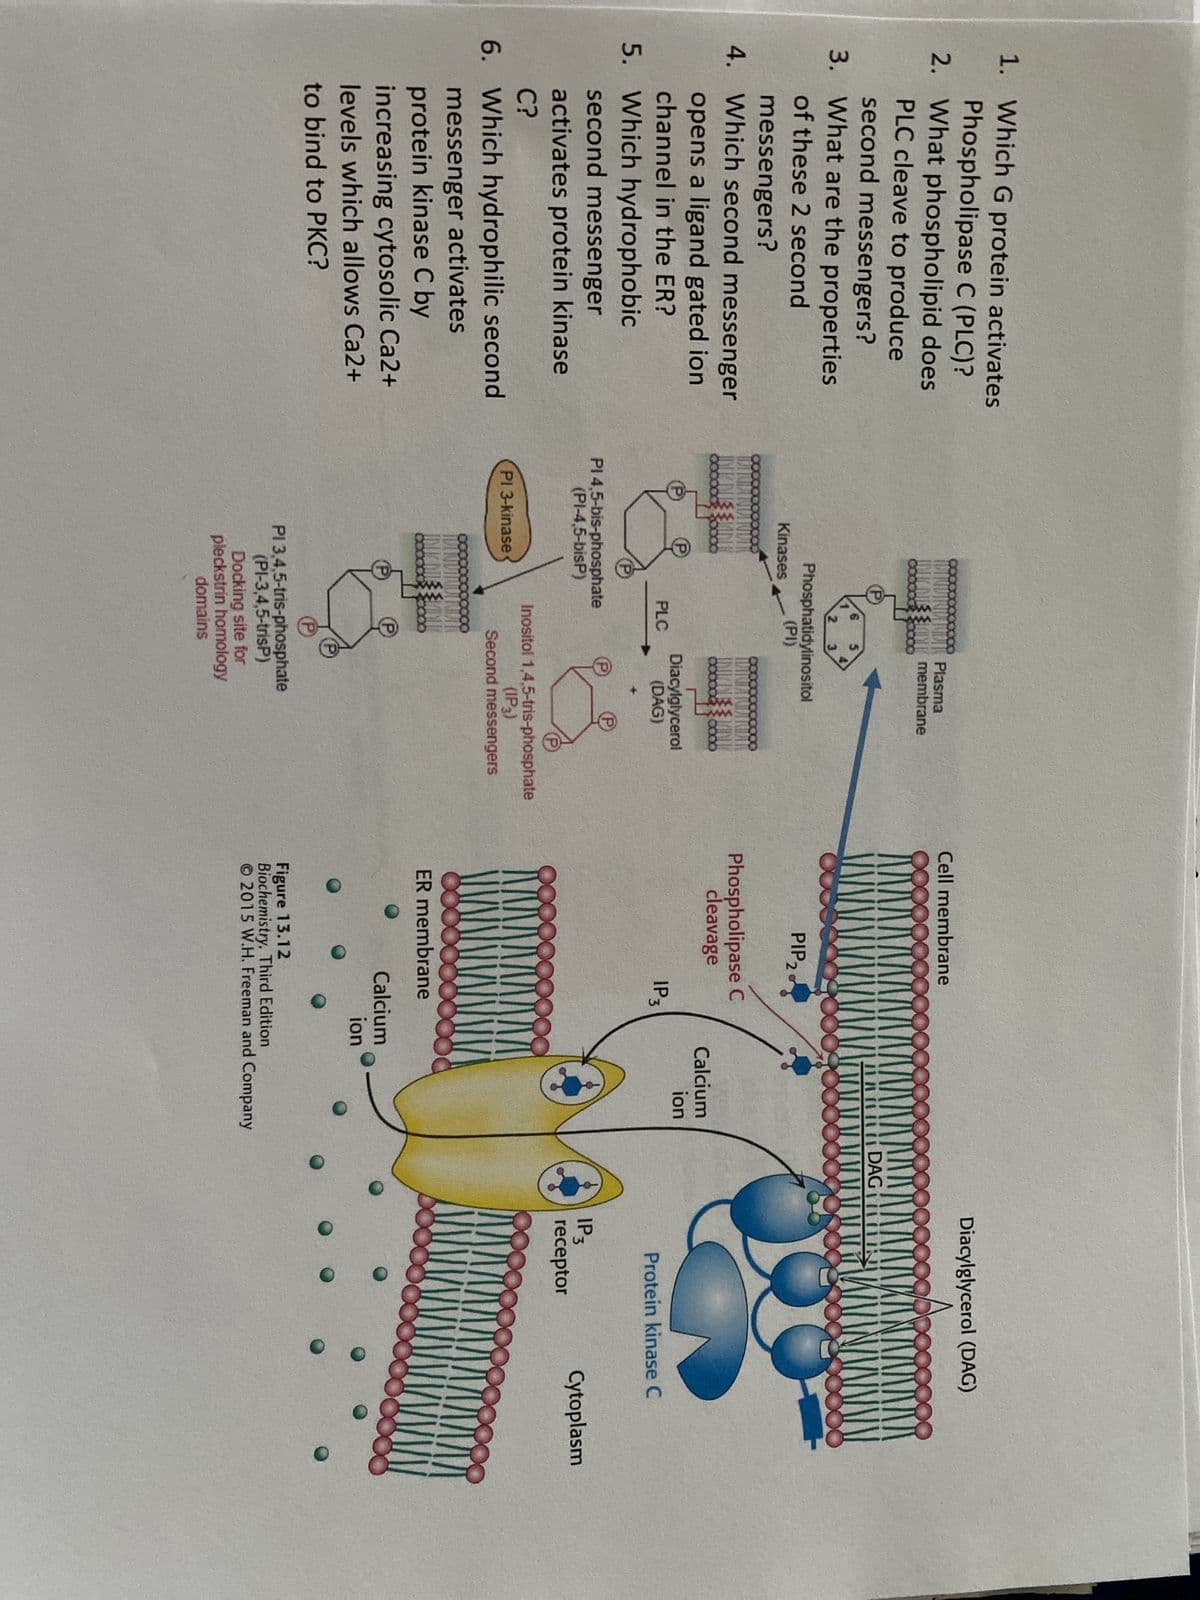 1. Which G protein activates
Phospholipase C (PLC)?
2. What phospholipid does
PLC cleave to produce
second messengers?
3. What are the properties
of these 2 second
messengers?
4. Which second messenger
opens a ligand gated ion
channel in the ER?
5. Which hydrophobic
second messenger
activates protein kinase
C?
6. Which hydrophilic second
messenger activates
protein kinase C by
increasing cytosolic Ca2+
levels which allows Ca2+
to bind to PKC?
Kinases
2
Phosphatidylinositol
(PI)
PI 3-kinase
PLC
PI 4,5-bis-phosphate
(PI-4,5-bisP)
Plasma
membrane
cog
Diacylglycerol
(DAG)
Inositol 1,4,5-tris-phosphate
(IP3)
Second messengers
PI 3,4,5-tris-phosphate
(PI-3,4,5-trisP)
domains
000
Docking site for
pleckstrin homology
Cell membrane
PIP 20
Phospholipase C
cleavage
IP 3
VIVAL
ER membrane
00
Calcium
ion
iii DAG
Calcium
ion
Figure 13.12
Biochemistry, Third Edition
2015 W.H. Freeman and Company
Diacylglycerol (DAG)
Protein kinase C
IP 3
receptor
MY
99
Cytoplasm